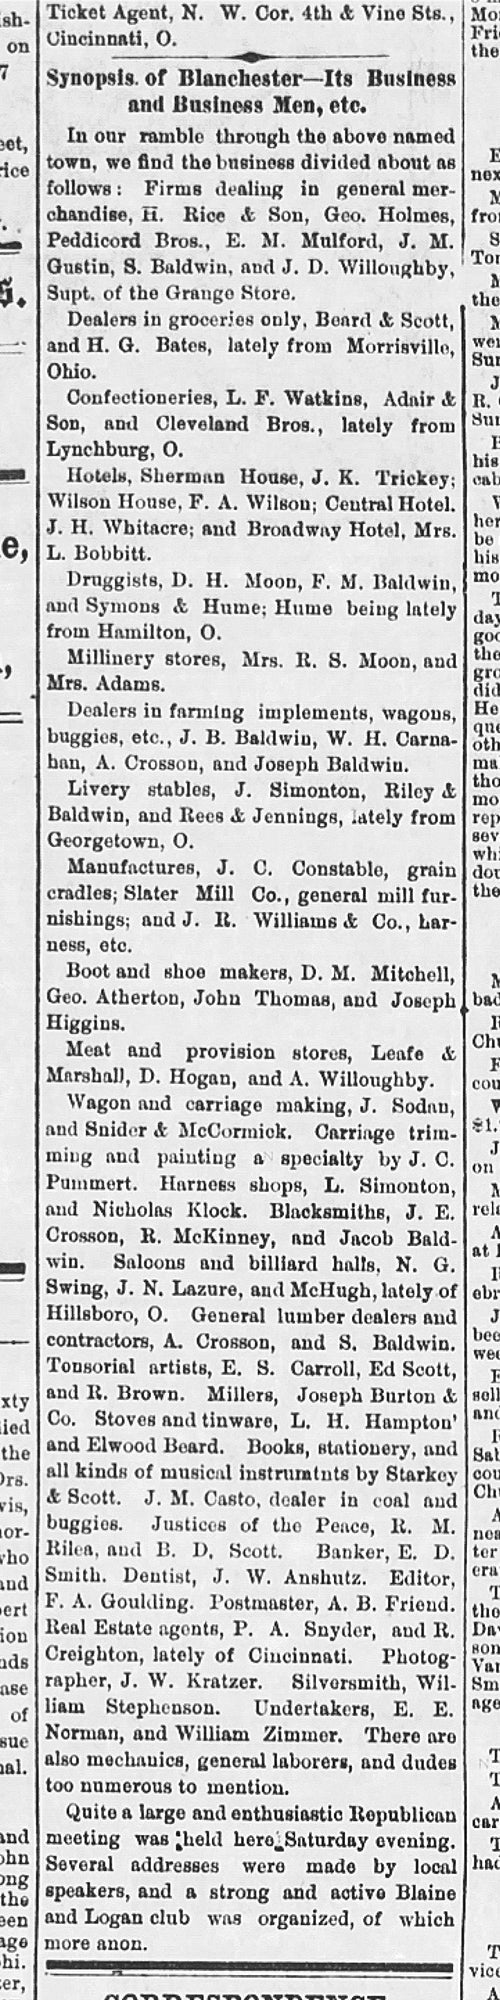 1884. List of Blanchester Businesses and Owners.